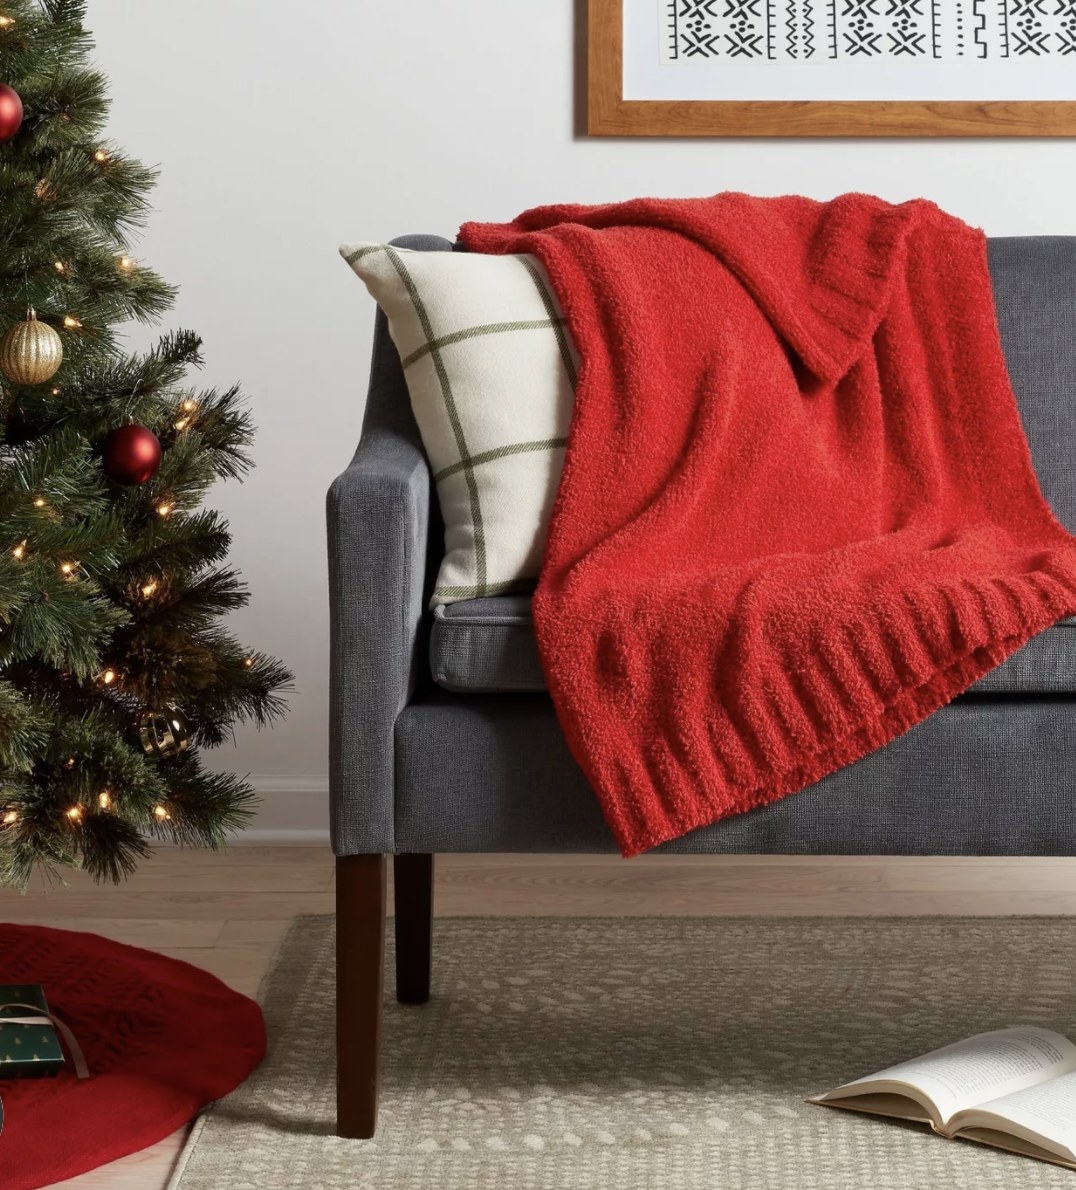 The bright red soft throw has a rubbed edge a heathered solid hue